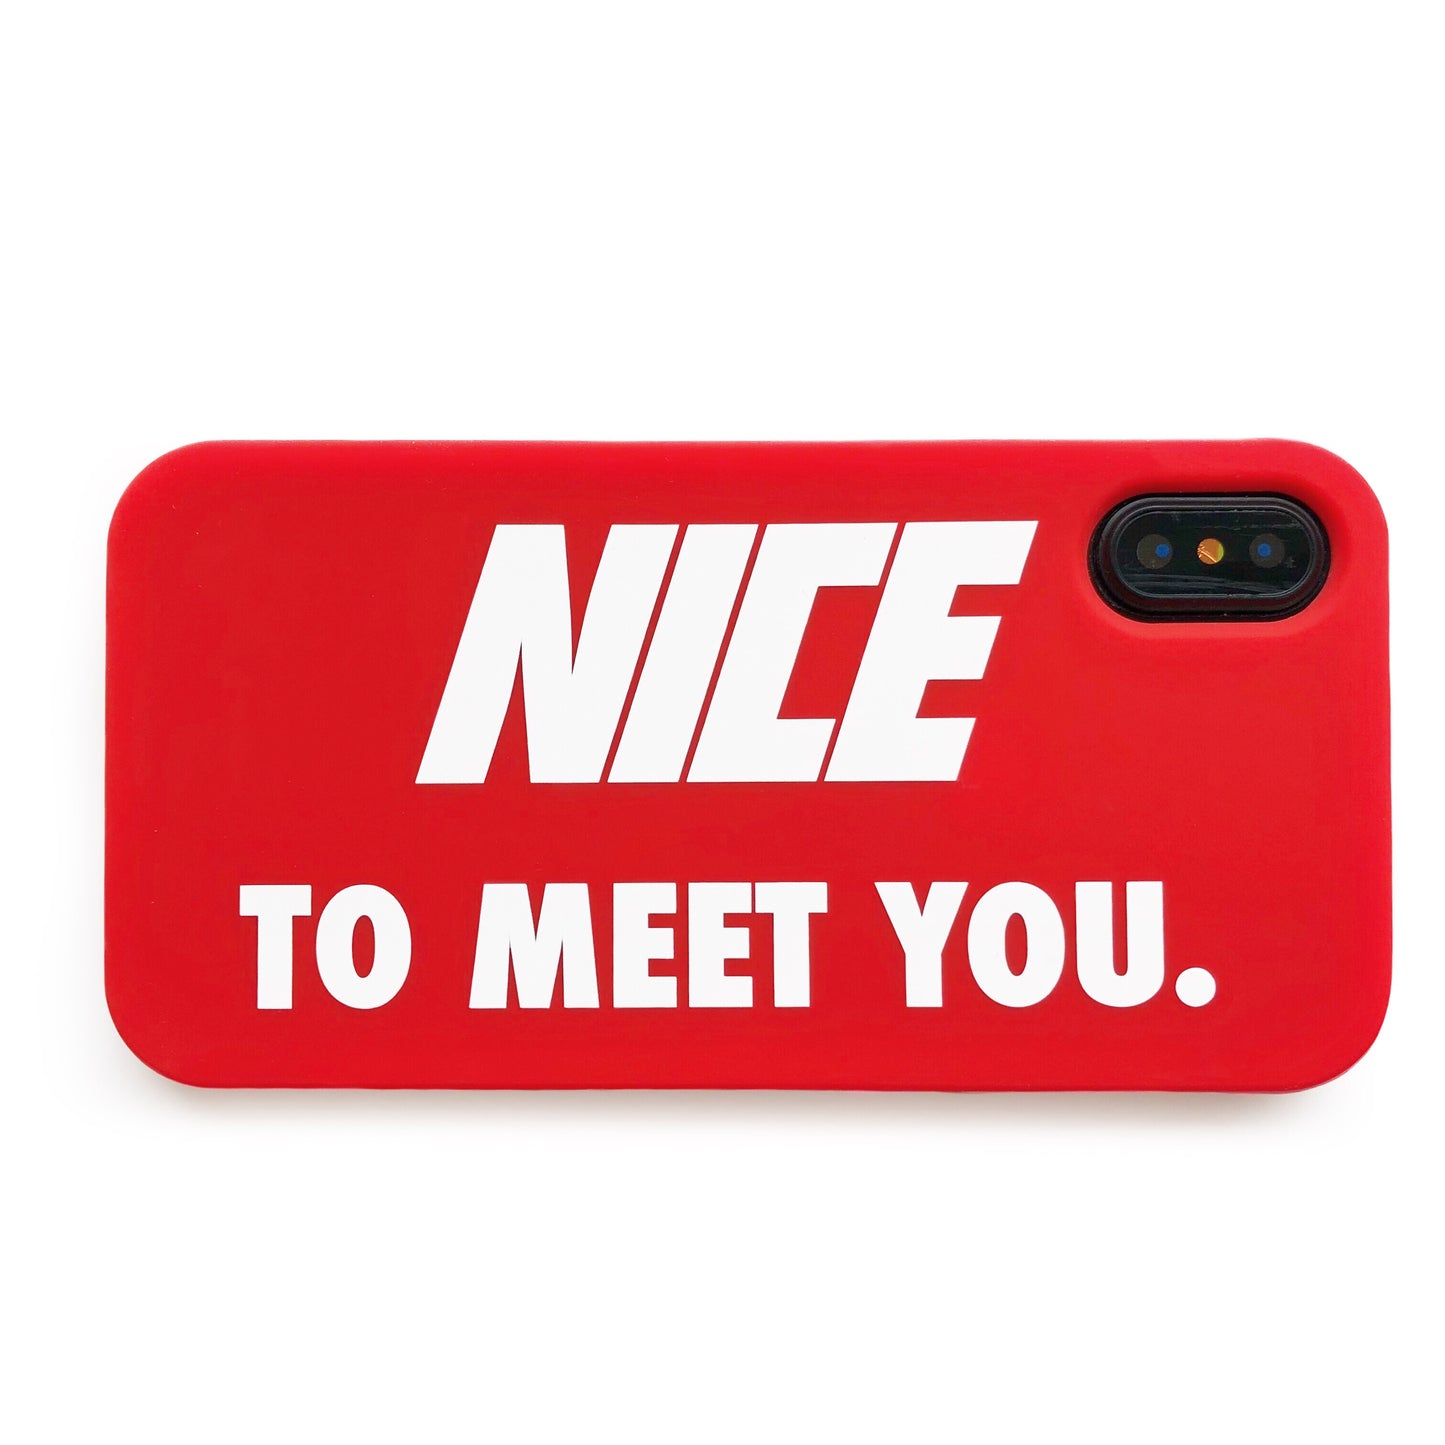 iPhone X/Xs Simple Case - Nice to Meet You (Red)